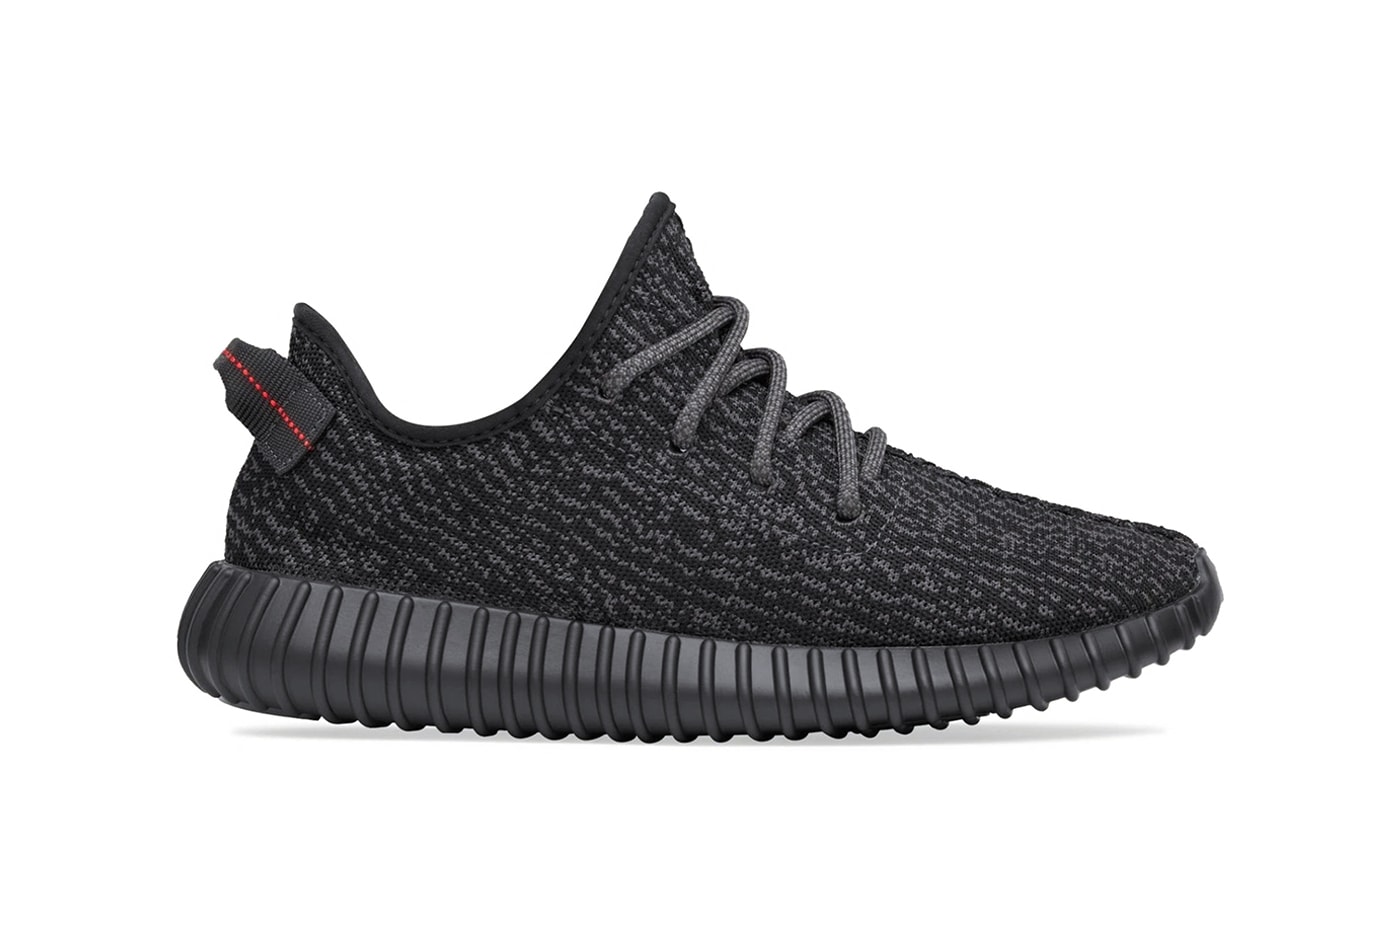 adidas YEEZY BOOST 350 Pirate Black Receives a Release Date